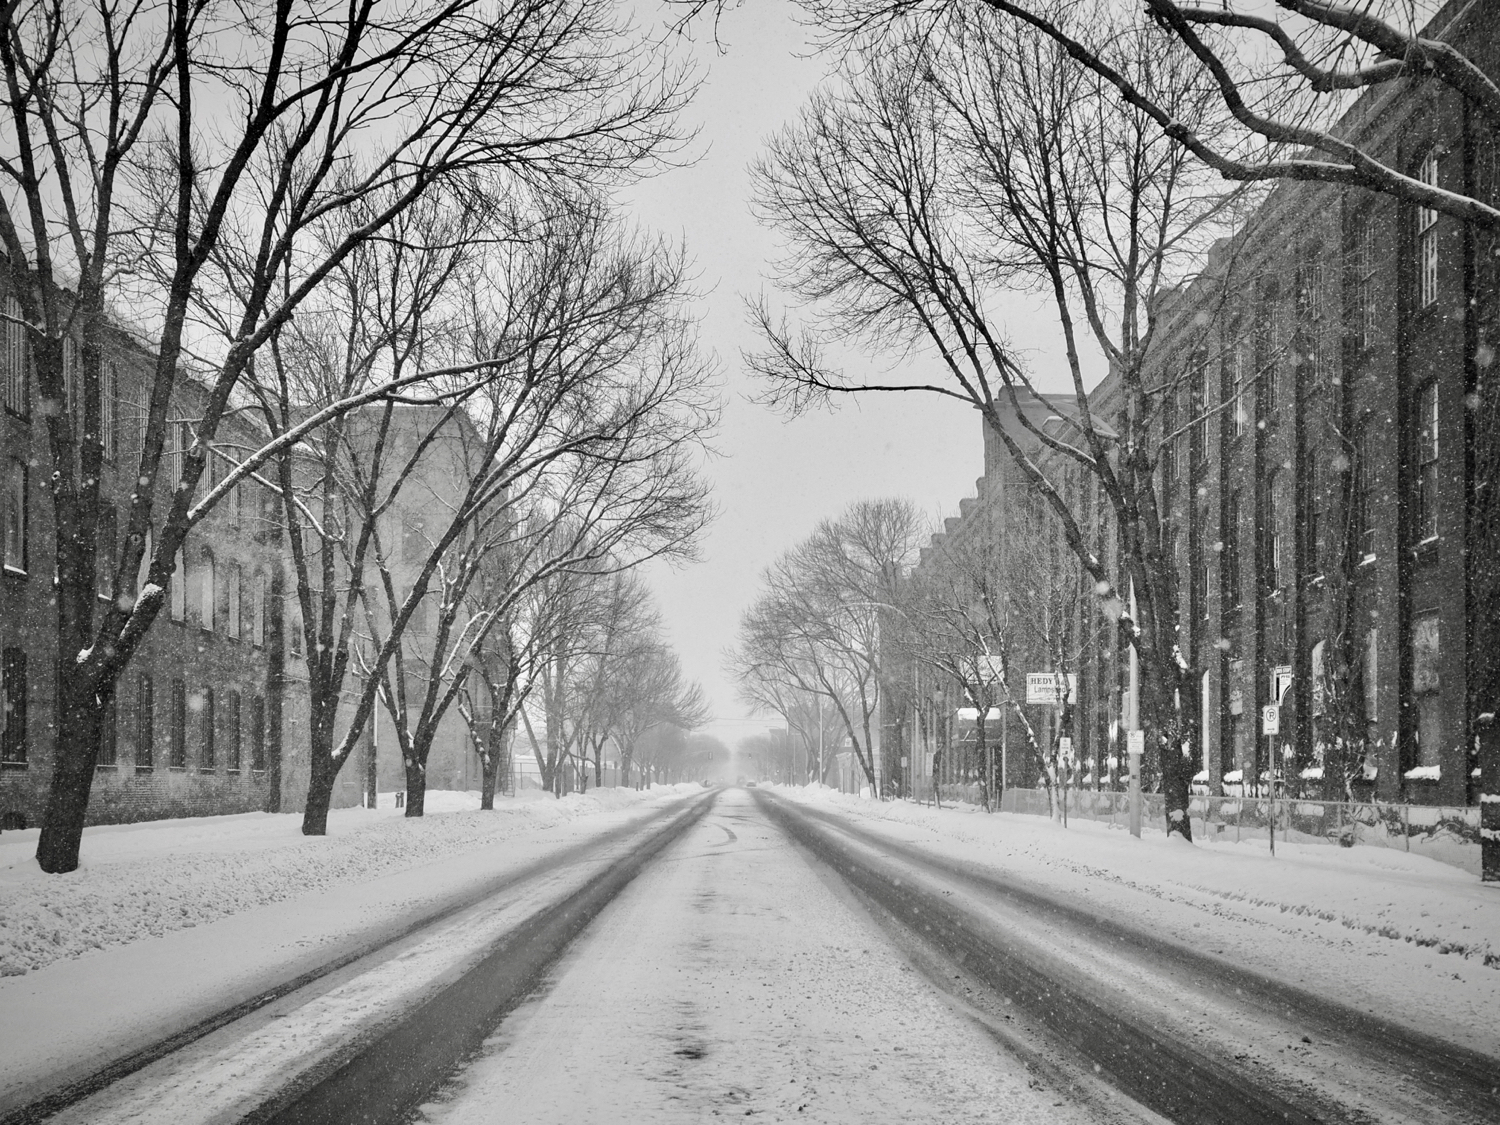 Main Street, Holyoke in the snow — copyright Trace Meek